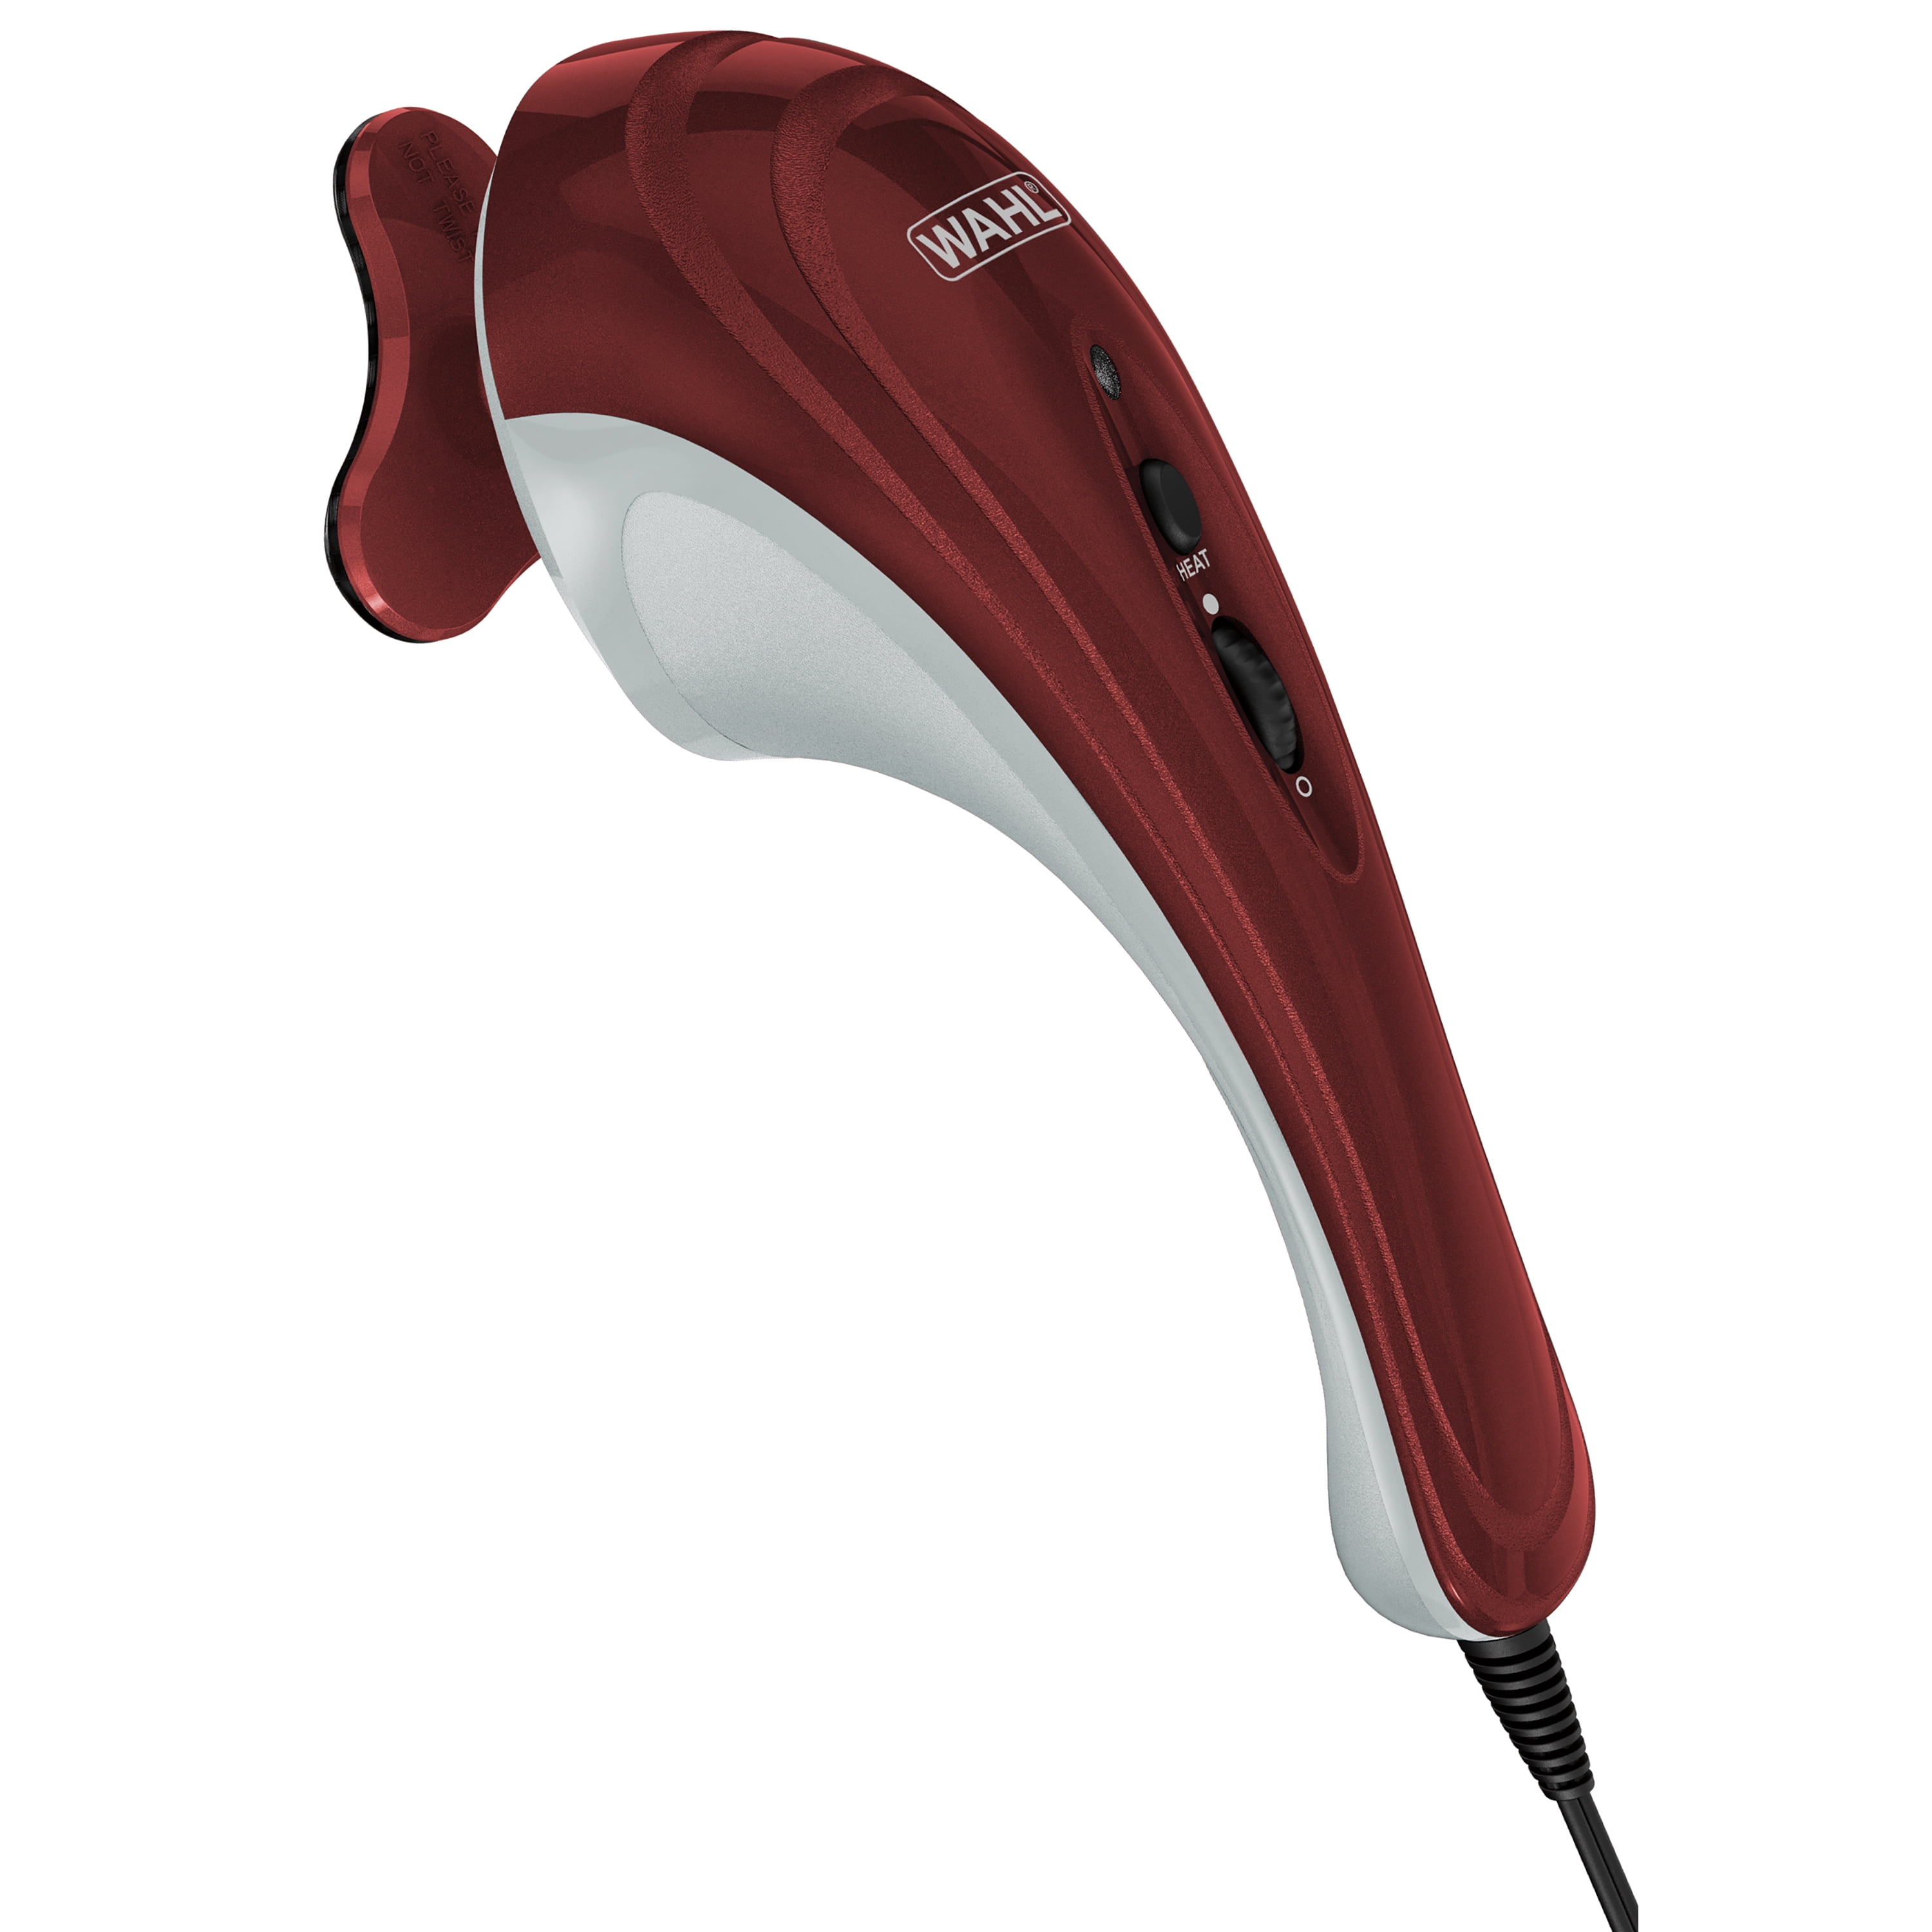 Wahl Hot Cold Deluxe Heat Therapy Electric Corded Massager with Variable Intensity for Customized Pain Relief Model 4295-400